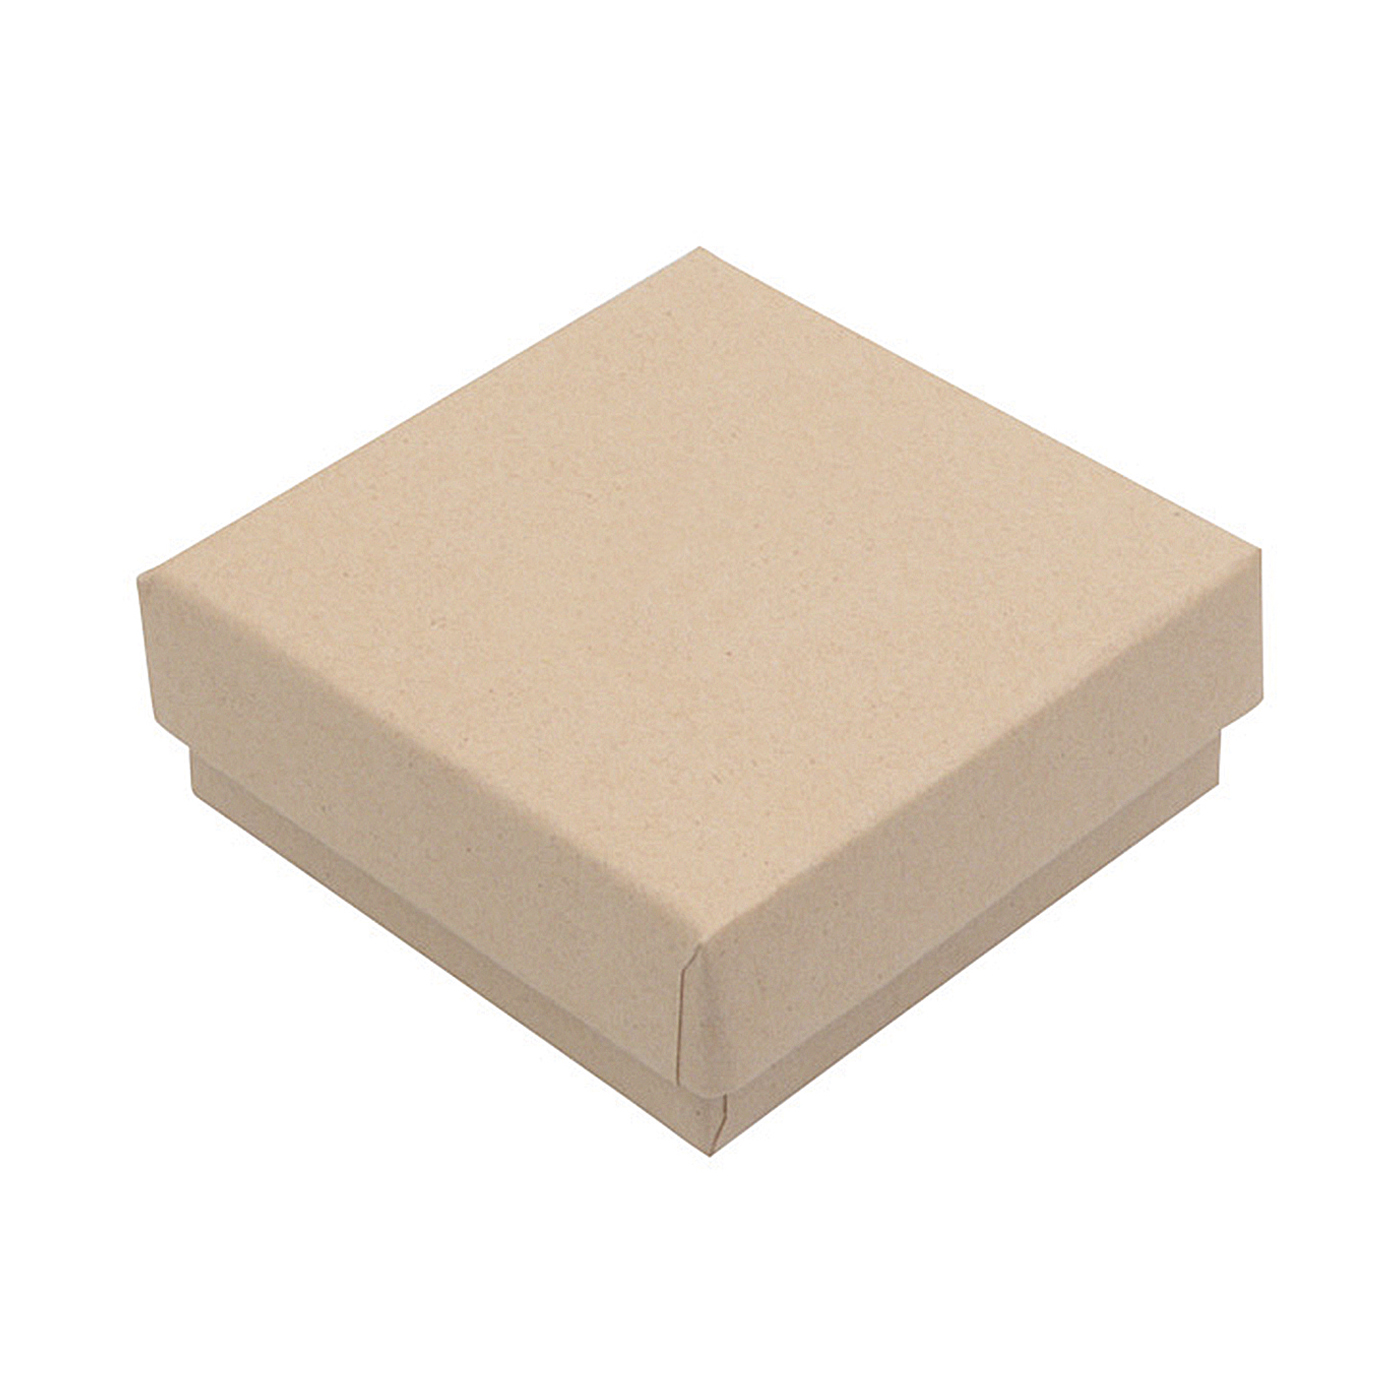 Jewellery Packaging "Eco", Natural, 65 x 65 x 25 mm - 1 piece